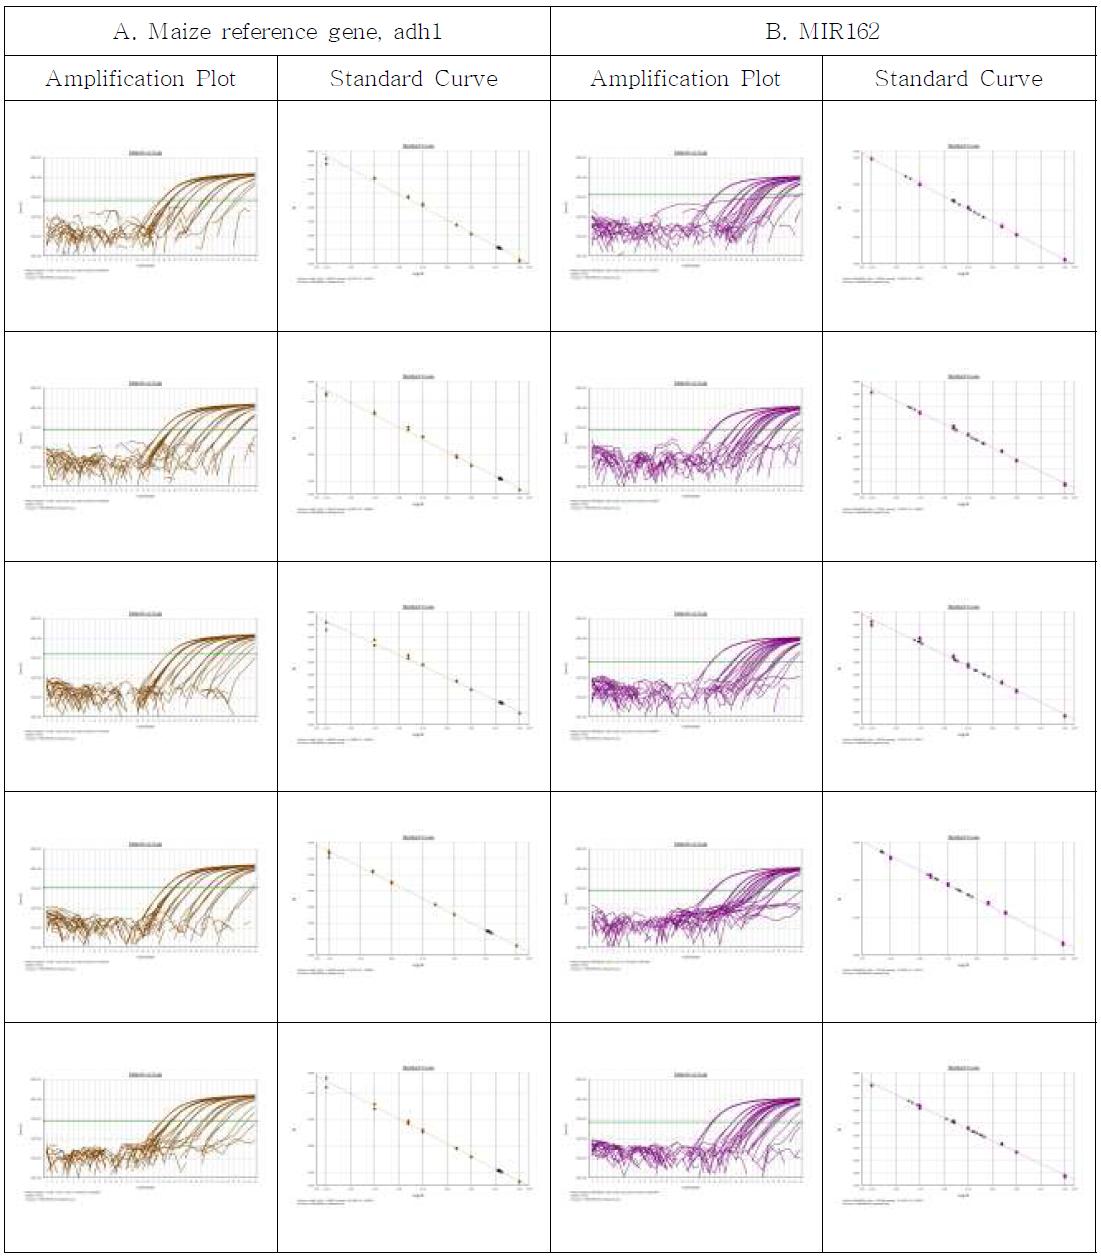 Amplification plots and standard curves for MIR162 event-specific quantitative Real-time PCR method using gradient-diluted MIR162 CRM genomic DNA as the template, performed by Lab. 1. A. Amplification graph and standard curves for the maize reference gene, adh1 assay. B. Amplification graph and standard curves for the MIR162-event specific assay.